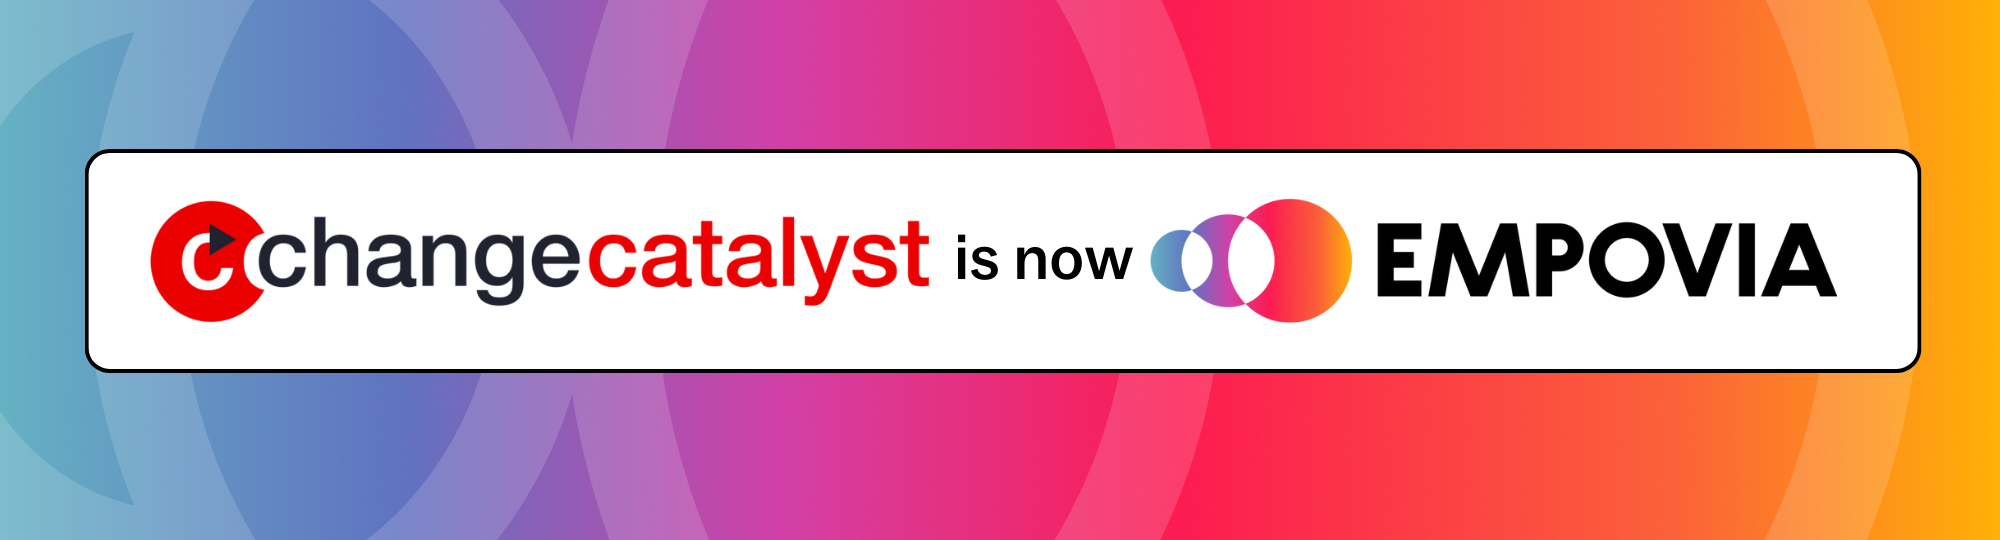 rainbow gradient header with a white text box that says "Change Catalyst is now Empovia" using both logos.